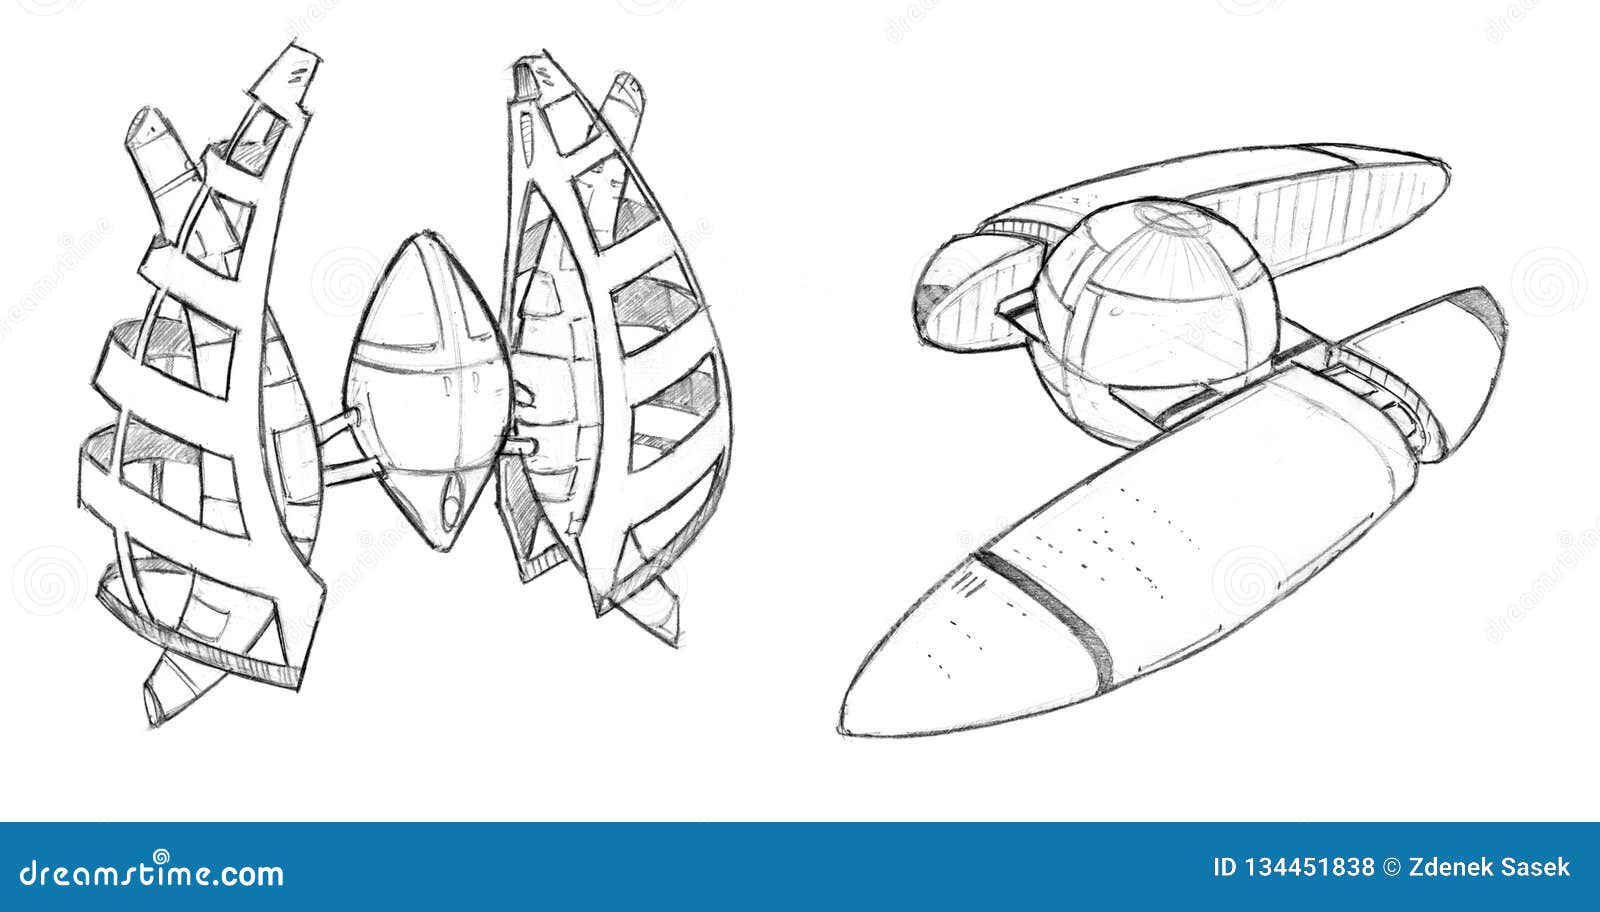 Initial concepts for a futuristic Space Station design  rconceptart